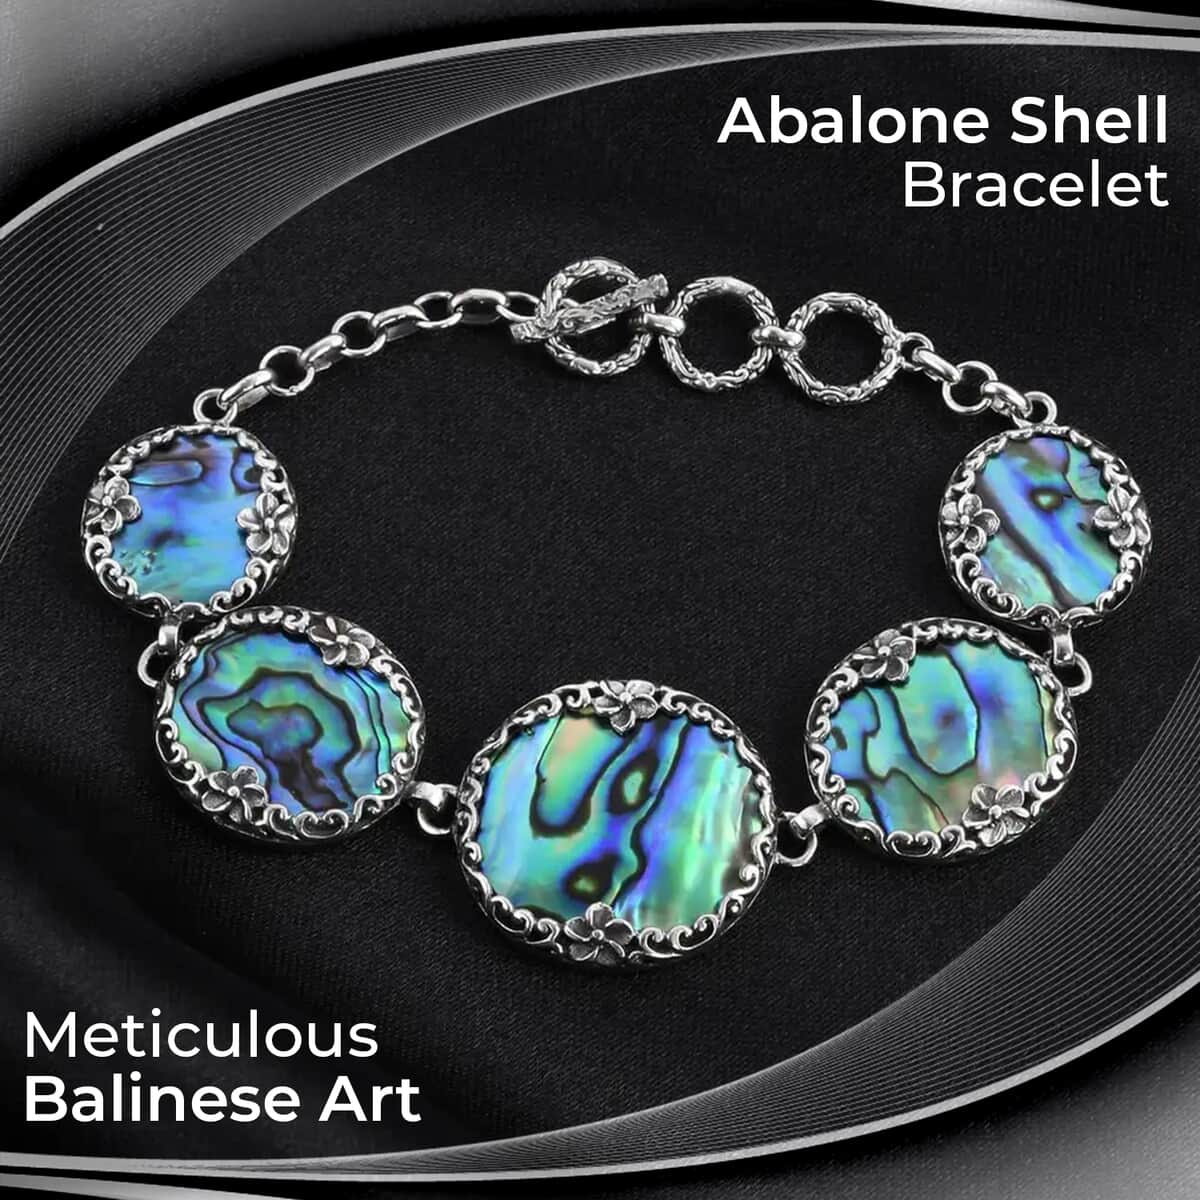 Bali Legacy Abalone Shell Bracelet in Sterling Silver, Sterling Silver Bracelet, 5 Stone Bracelet, Toggle Clasp Bracelet, Silver Jewelry, Birthday Gift (6.50-8.0In) image number 1